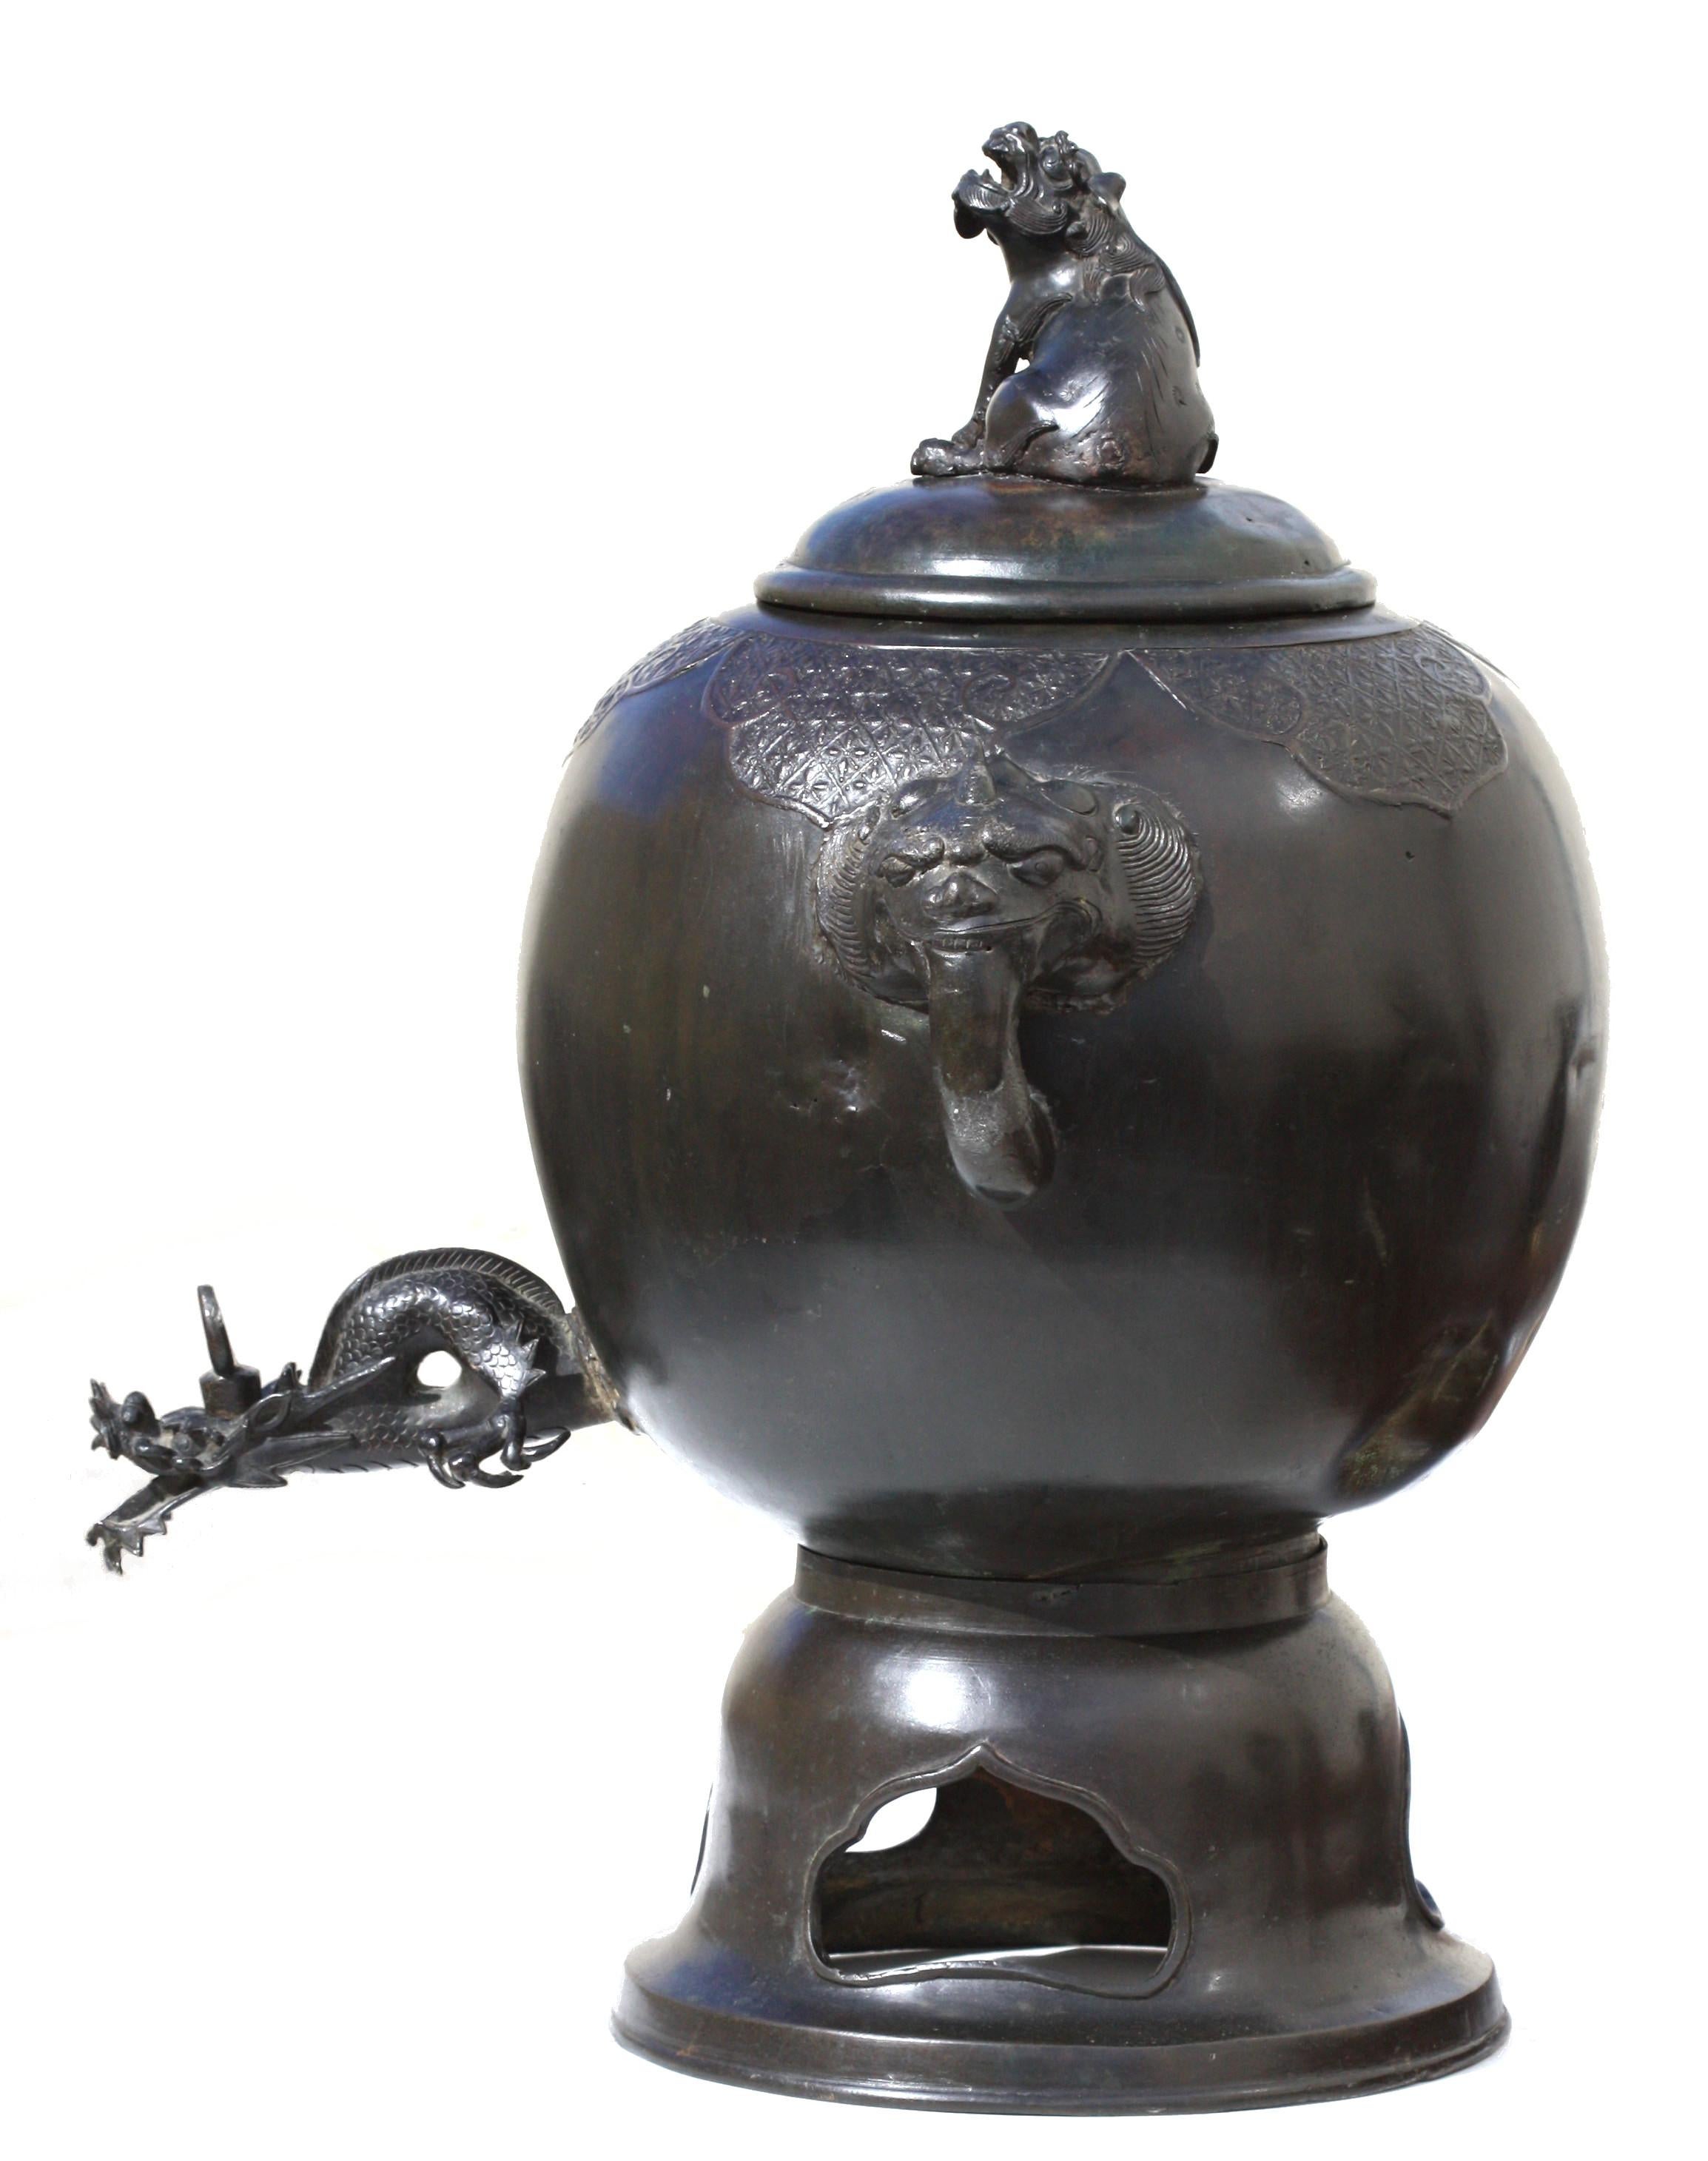 
A Japanese Bronze Ceremonial Samovar with Cover
Meiji period, late 19th century
of round section with wide shoulders tapering towards the tall, splayed foot, the neck with foo-dog handles, supporting a domed cover with a foo-dog finial, 12 x 21 in.